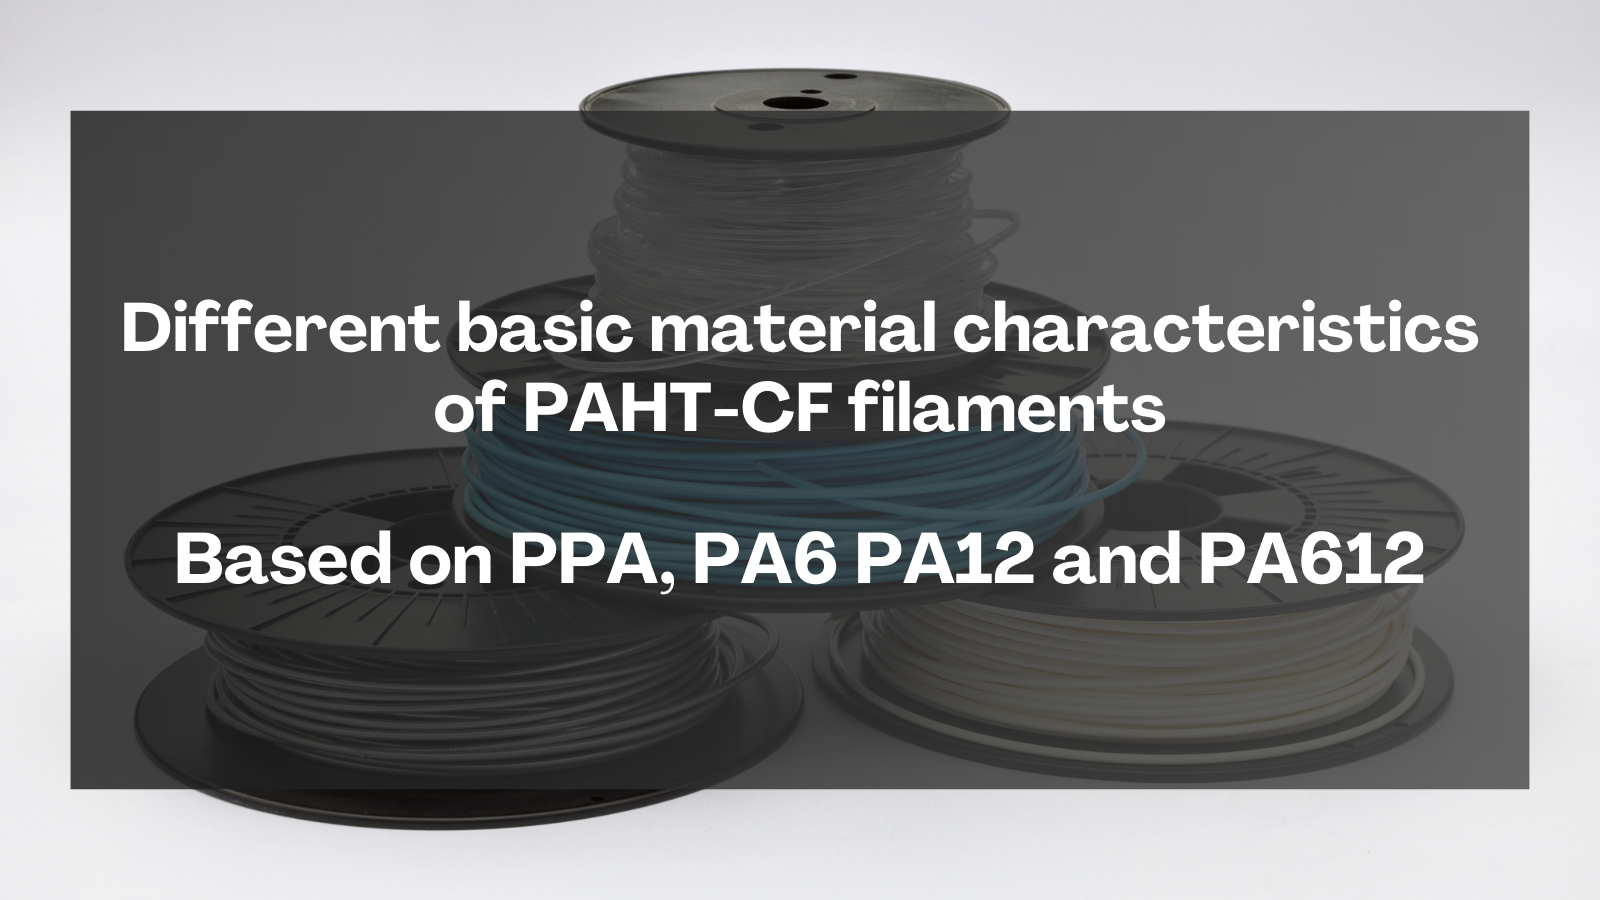 Comparing Composition and Performance of PAHT Filament Materials: Based on PPA, PA6, PA12, and PA612